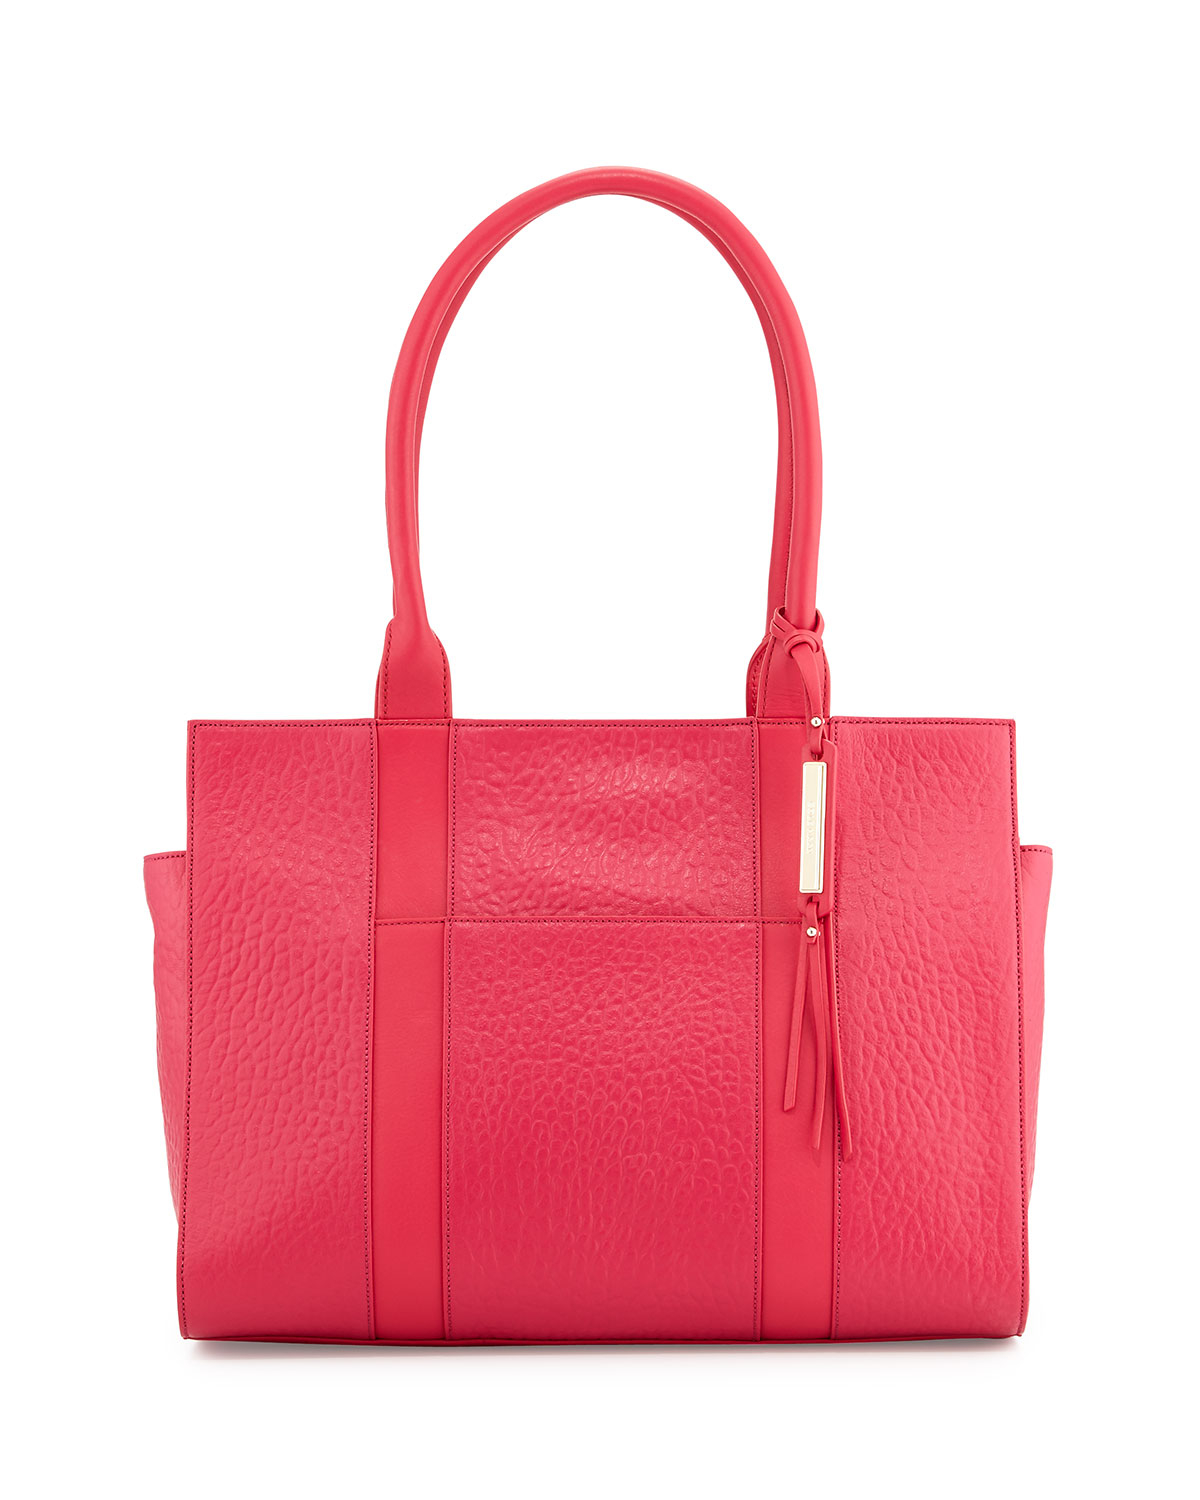 Cole haan Emily Large Leather Tote Bag in Pink | Lyst